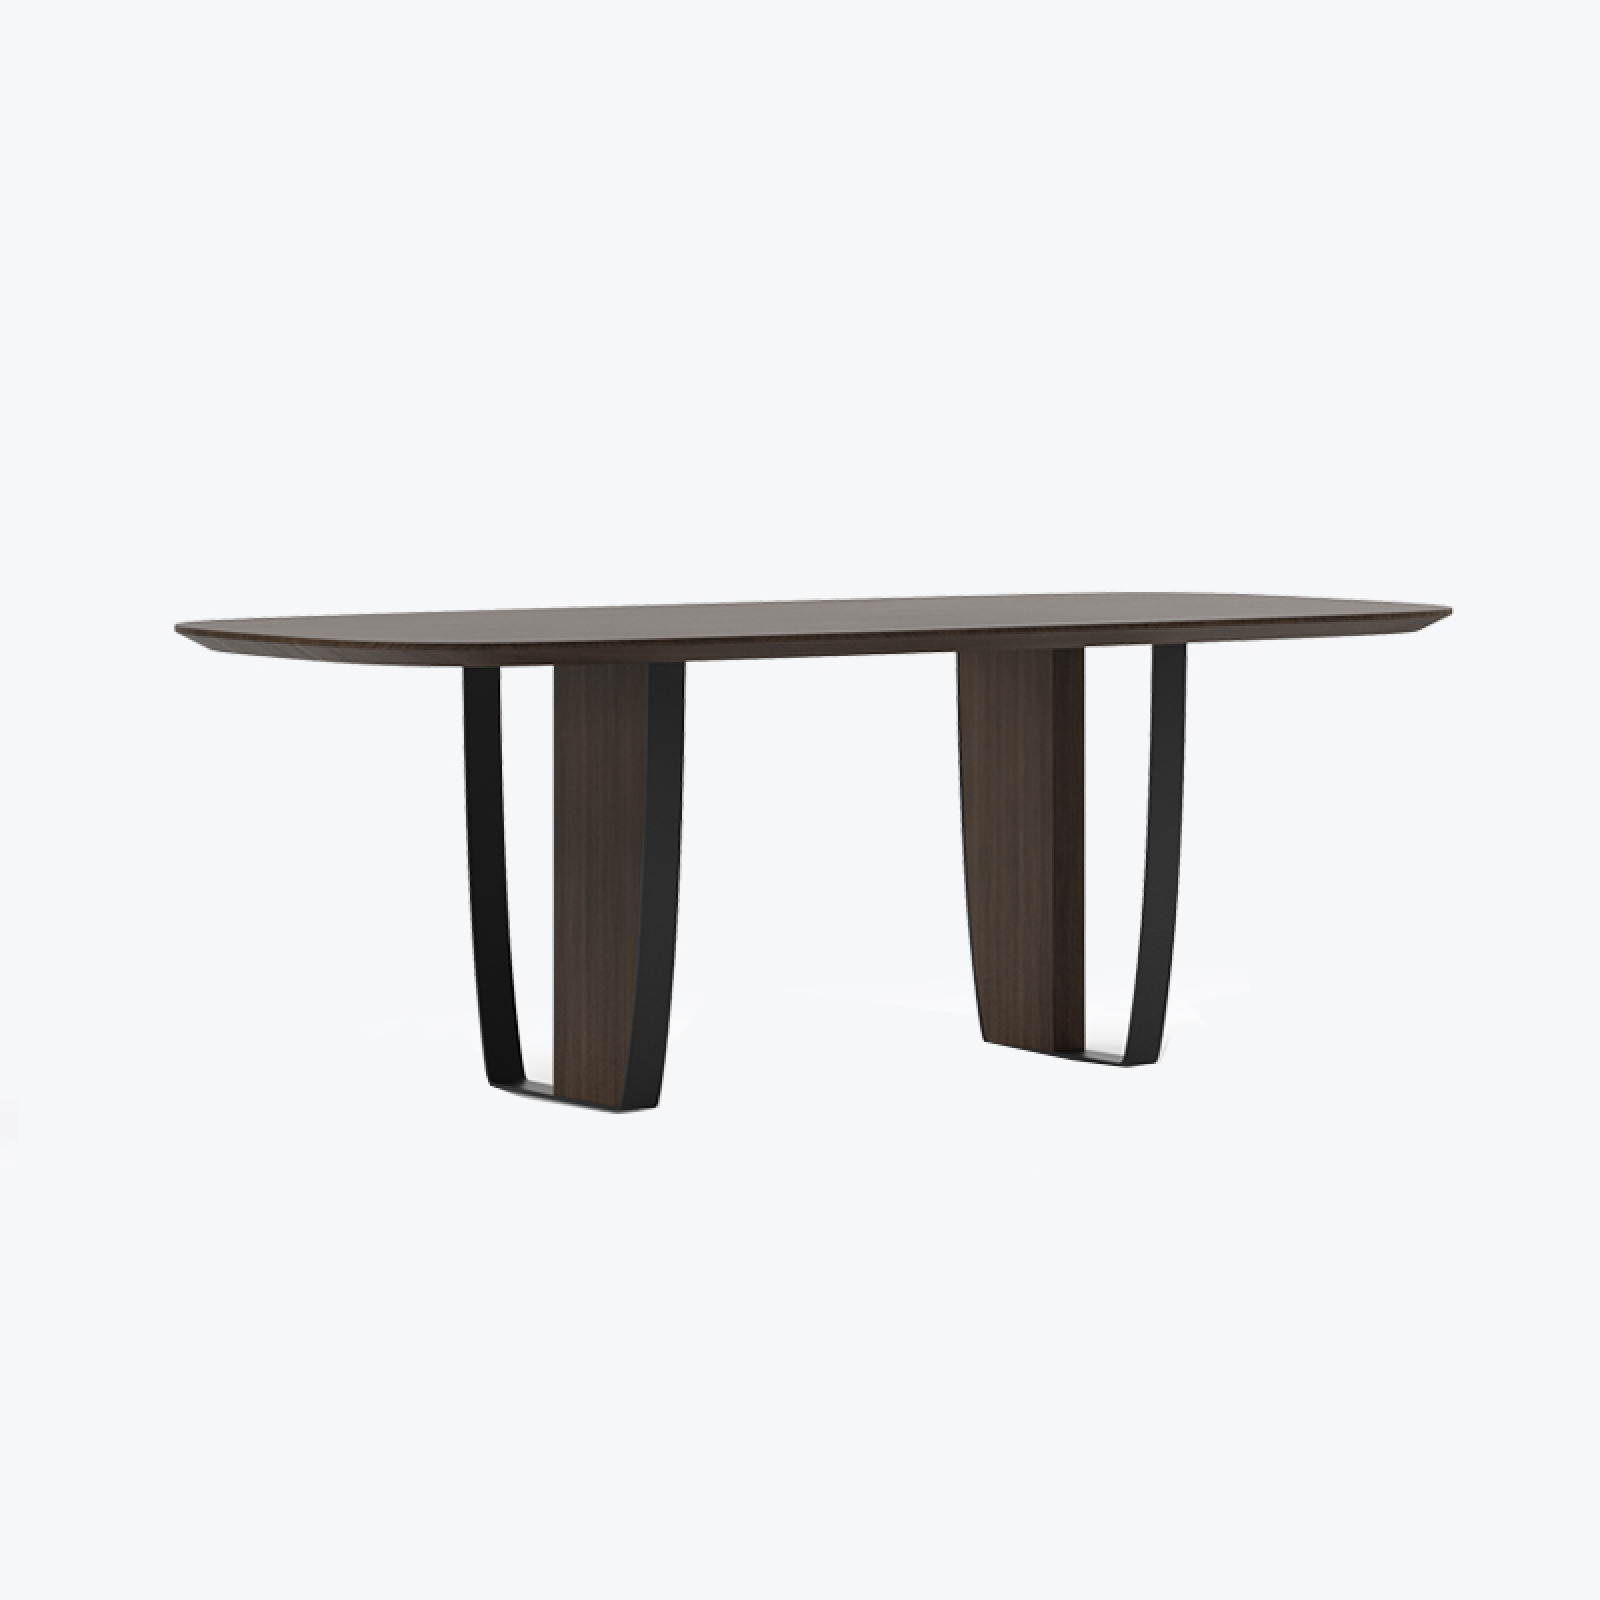 Barcelona dining table